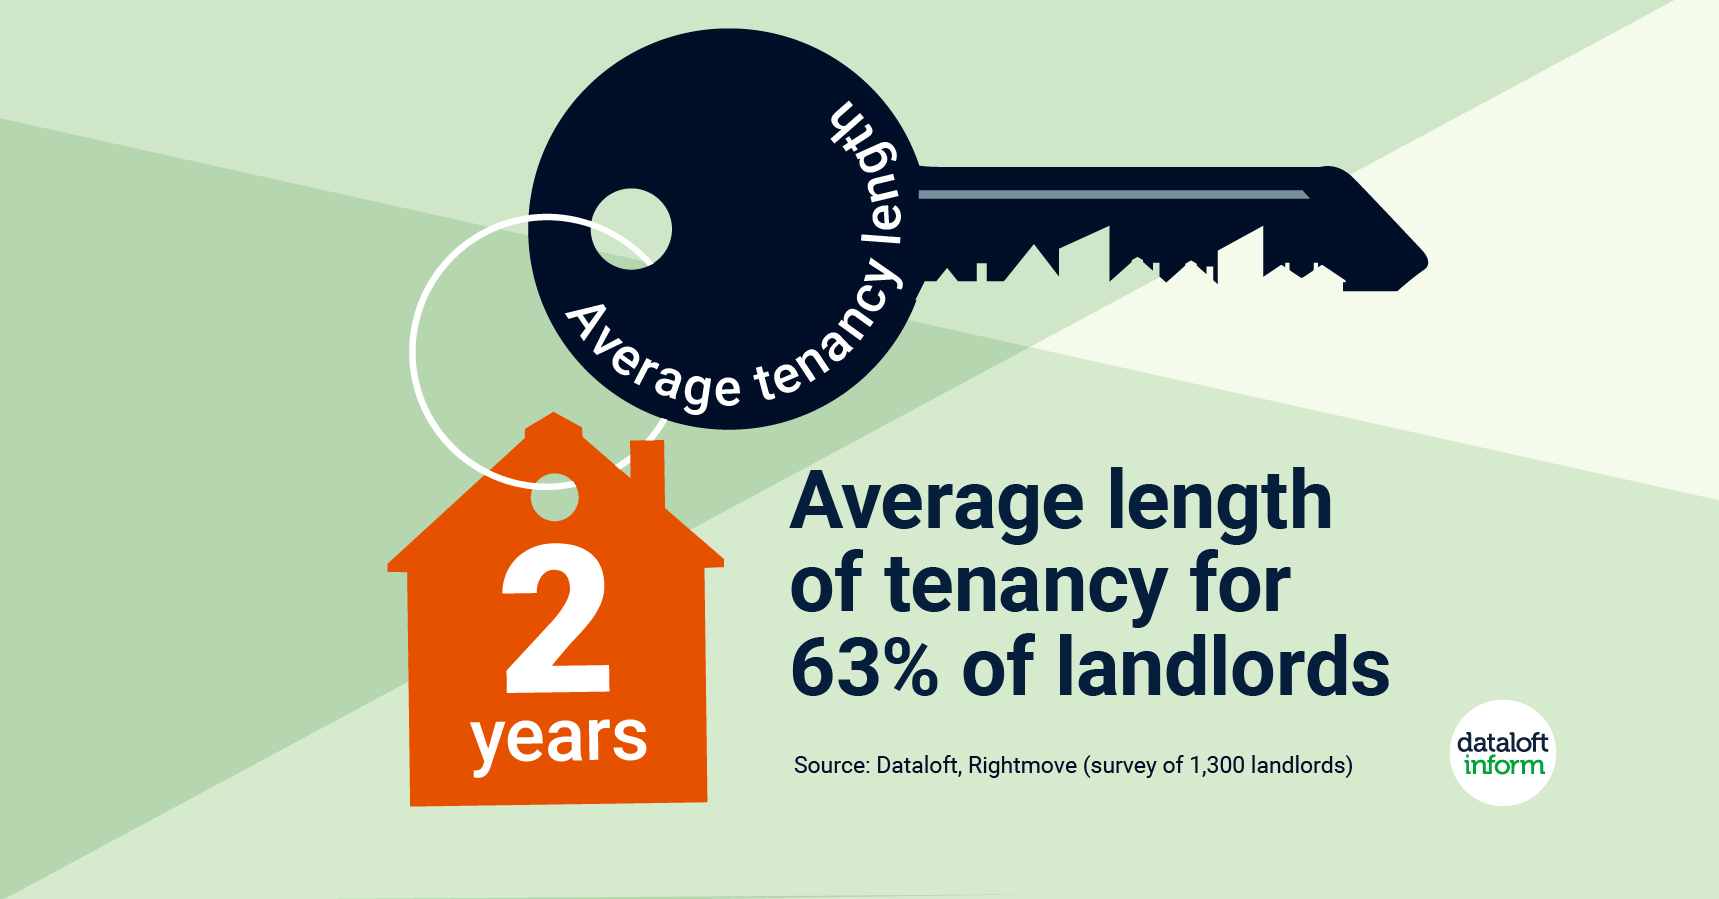 What is the average tenancy length